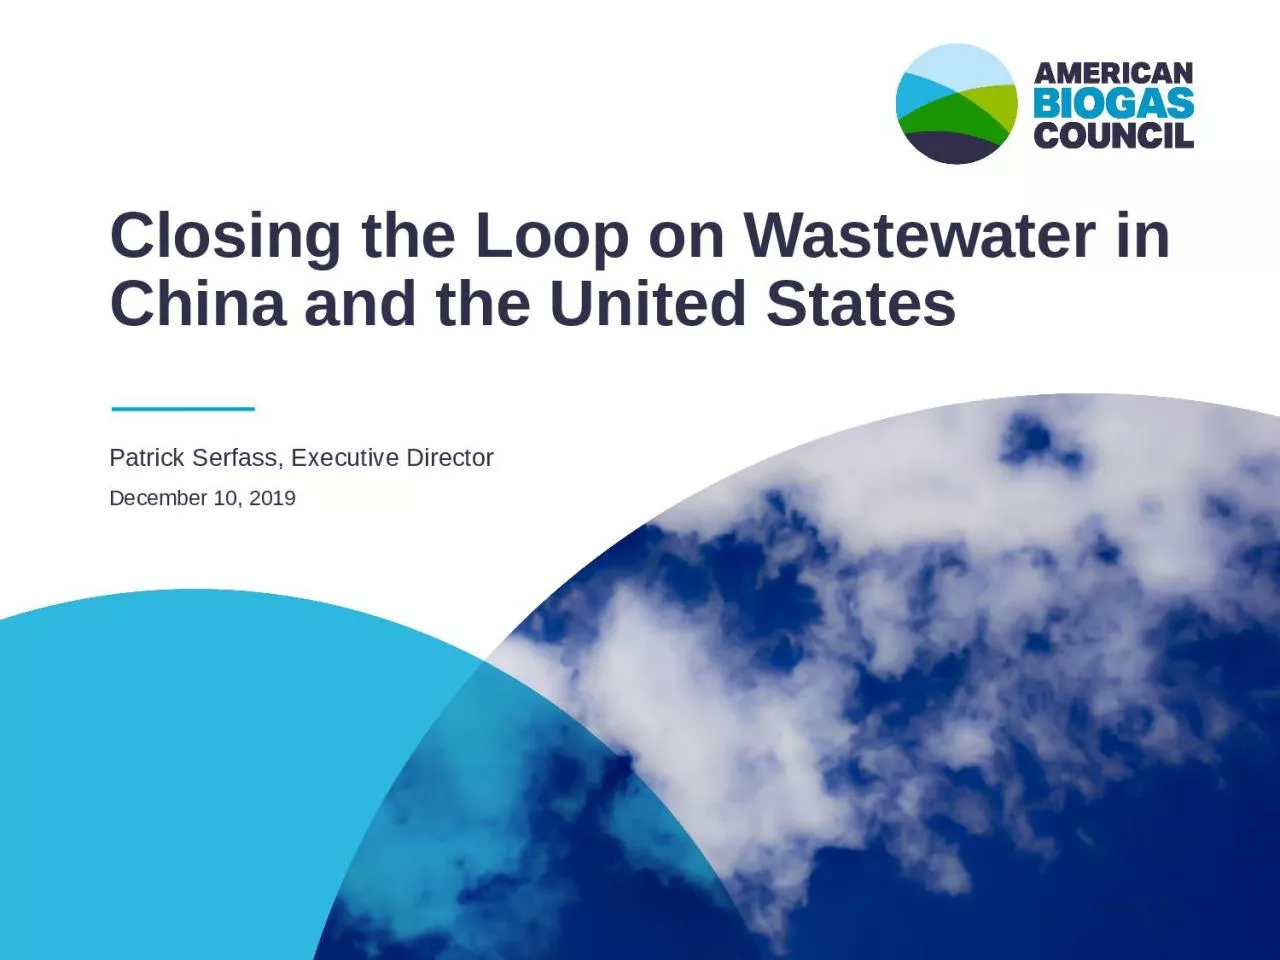 Closing the Loop on Wastewater in China and the United